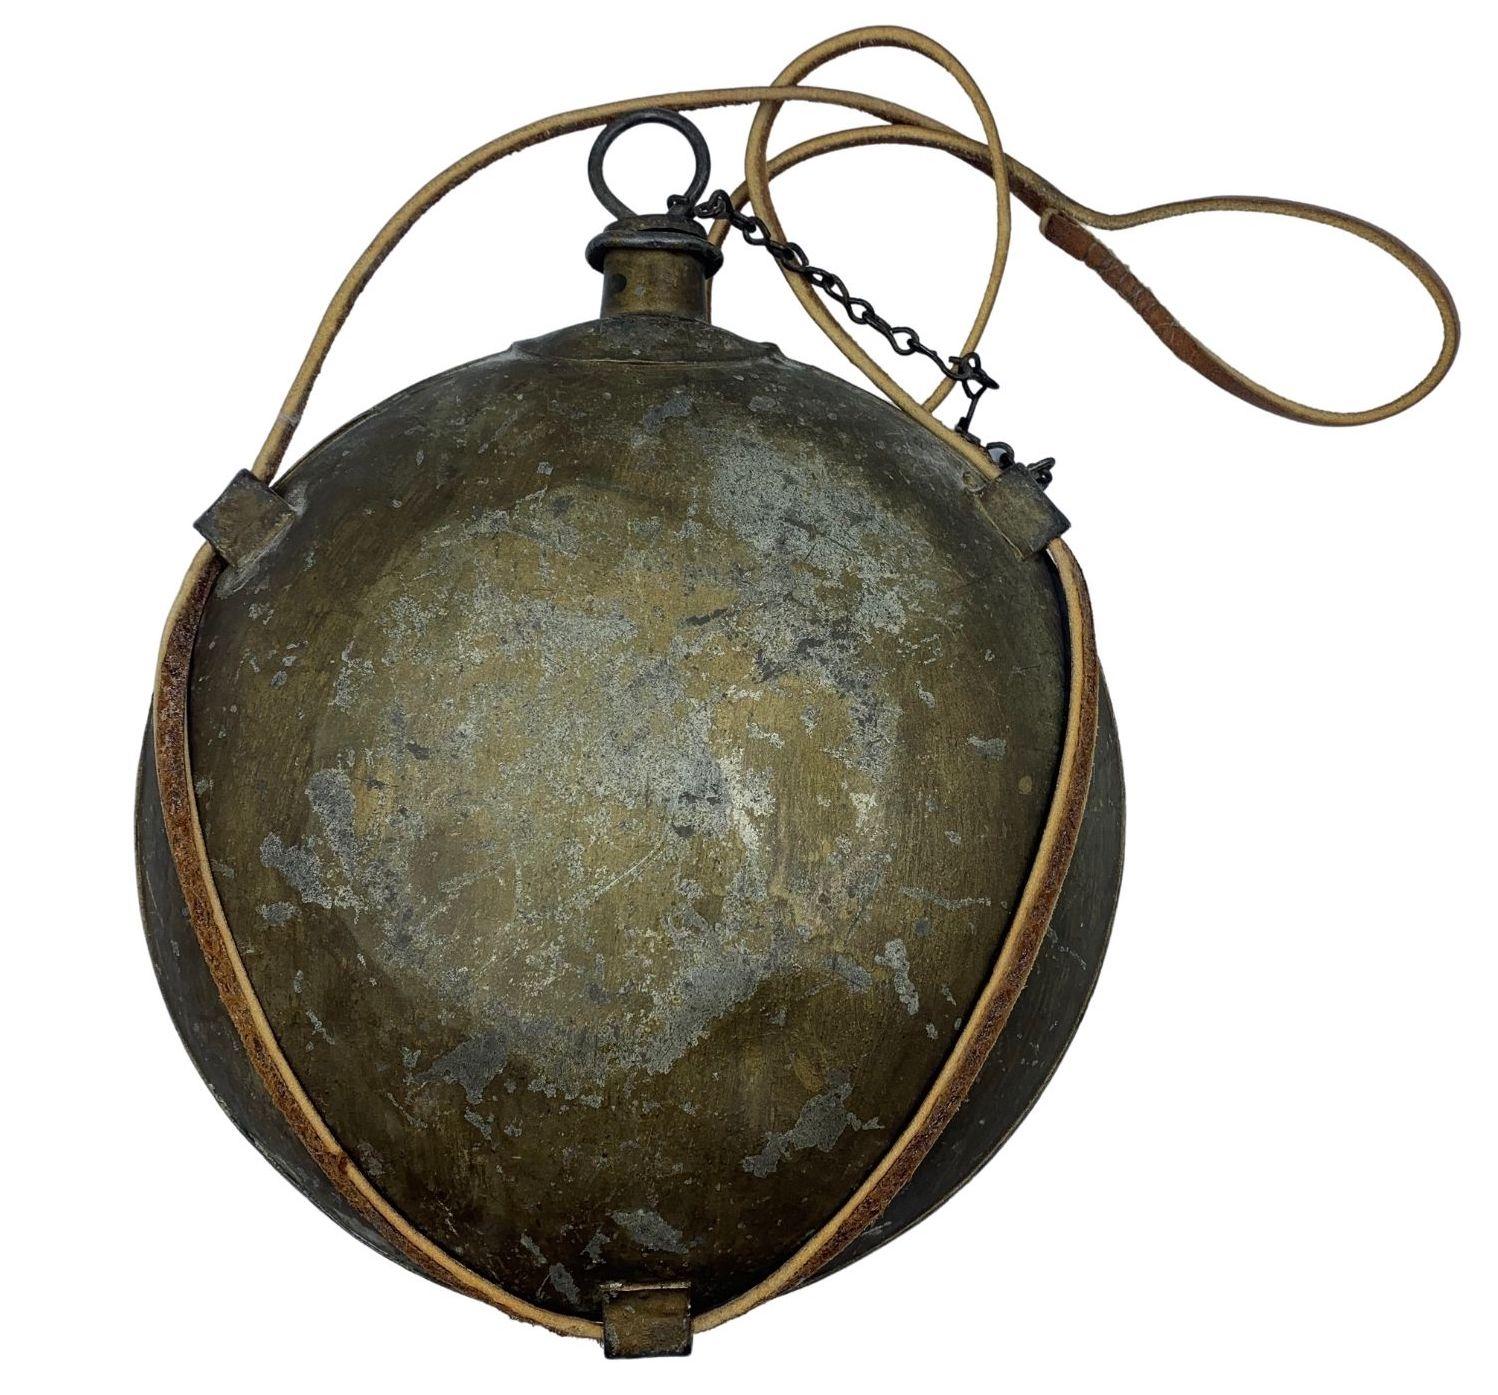 Presented is an original Civil War-era tin canteen. A classic example of the 1858 model “smoothside” canteen, this example retains its original pull ring, cork stopper, and linked chain stopper attachment. The body of one side of the tin canteen was